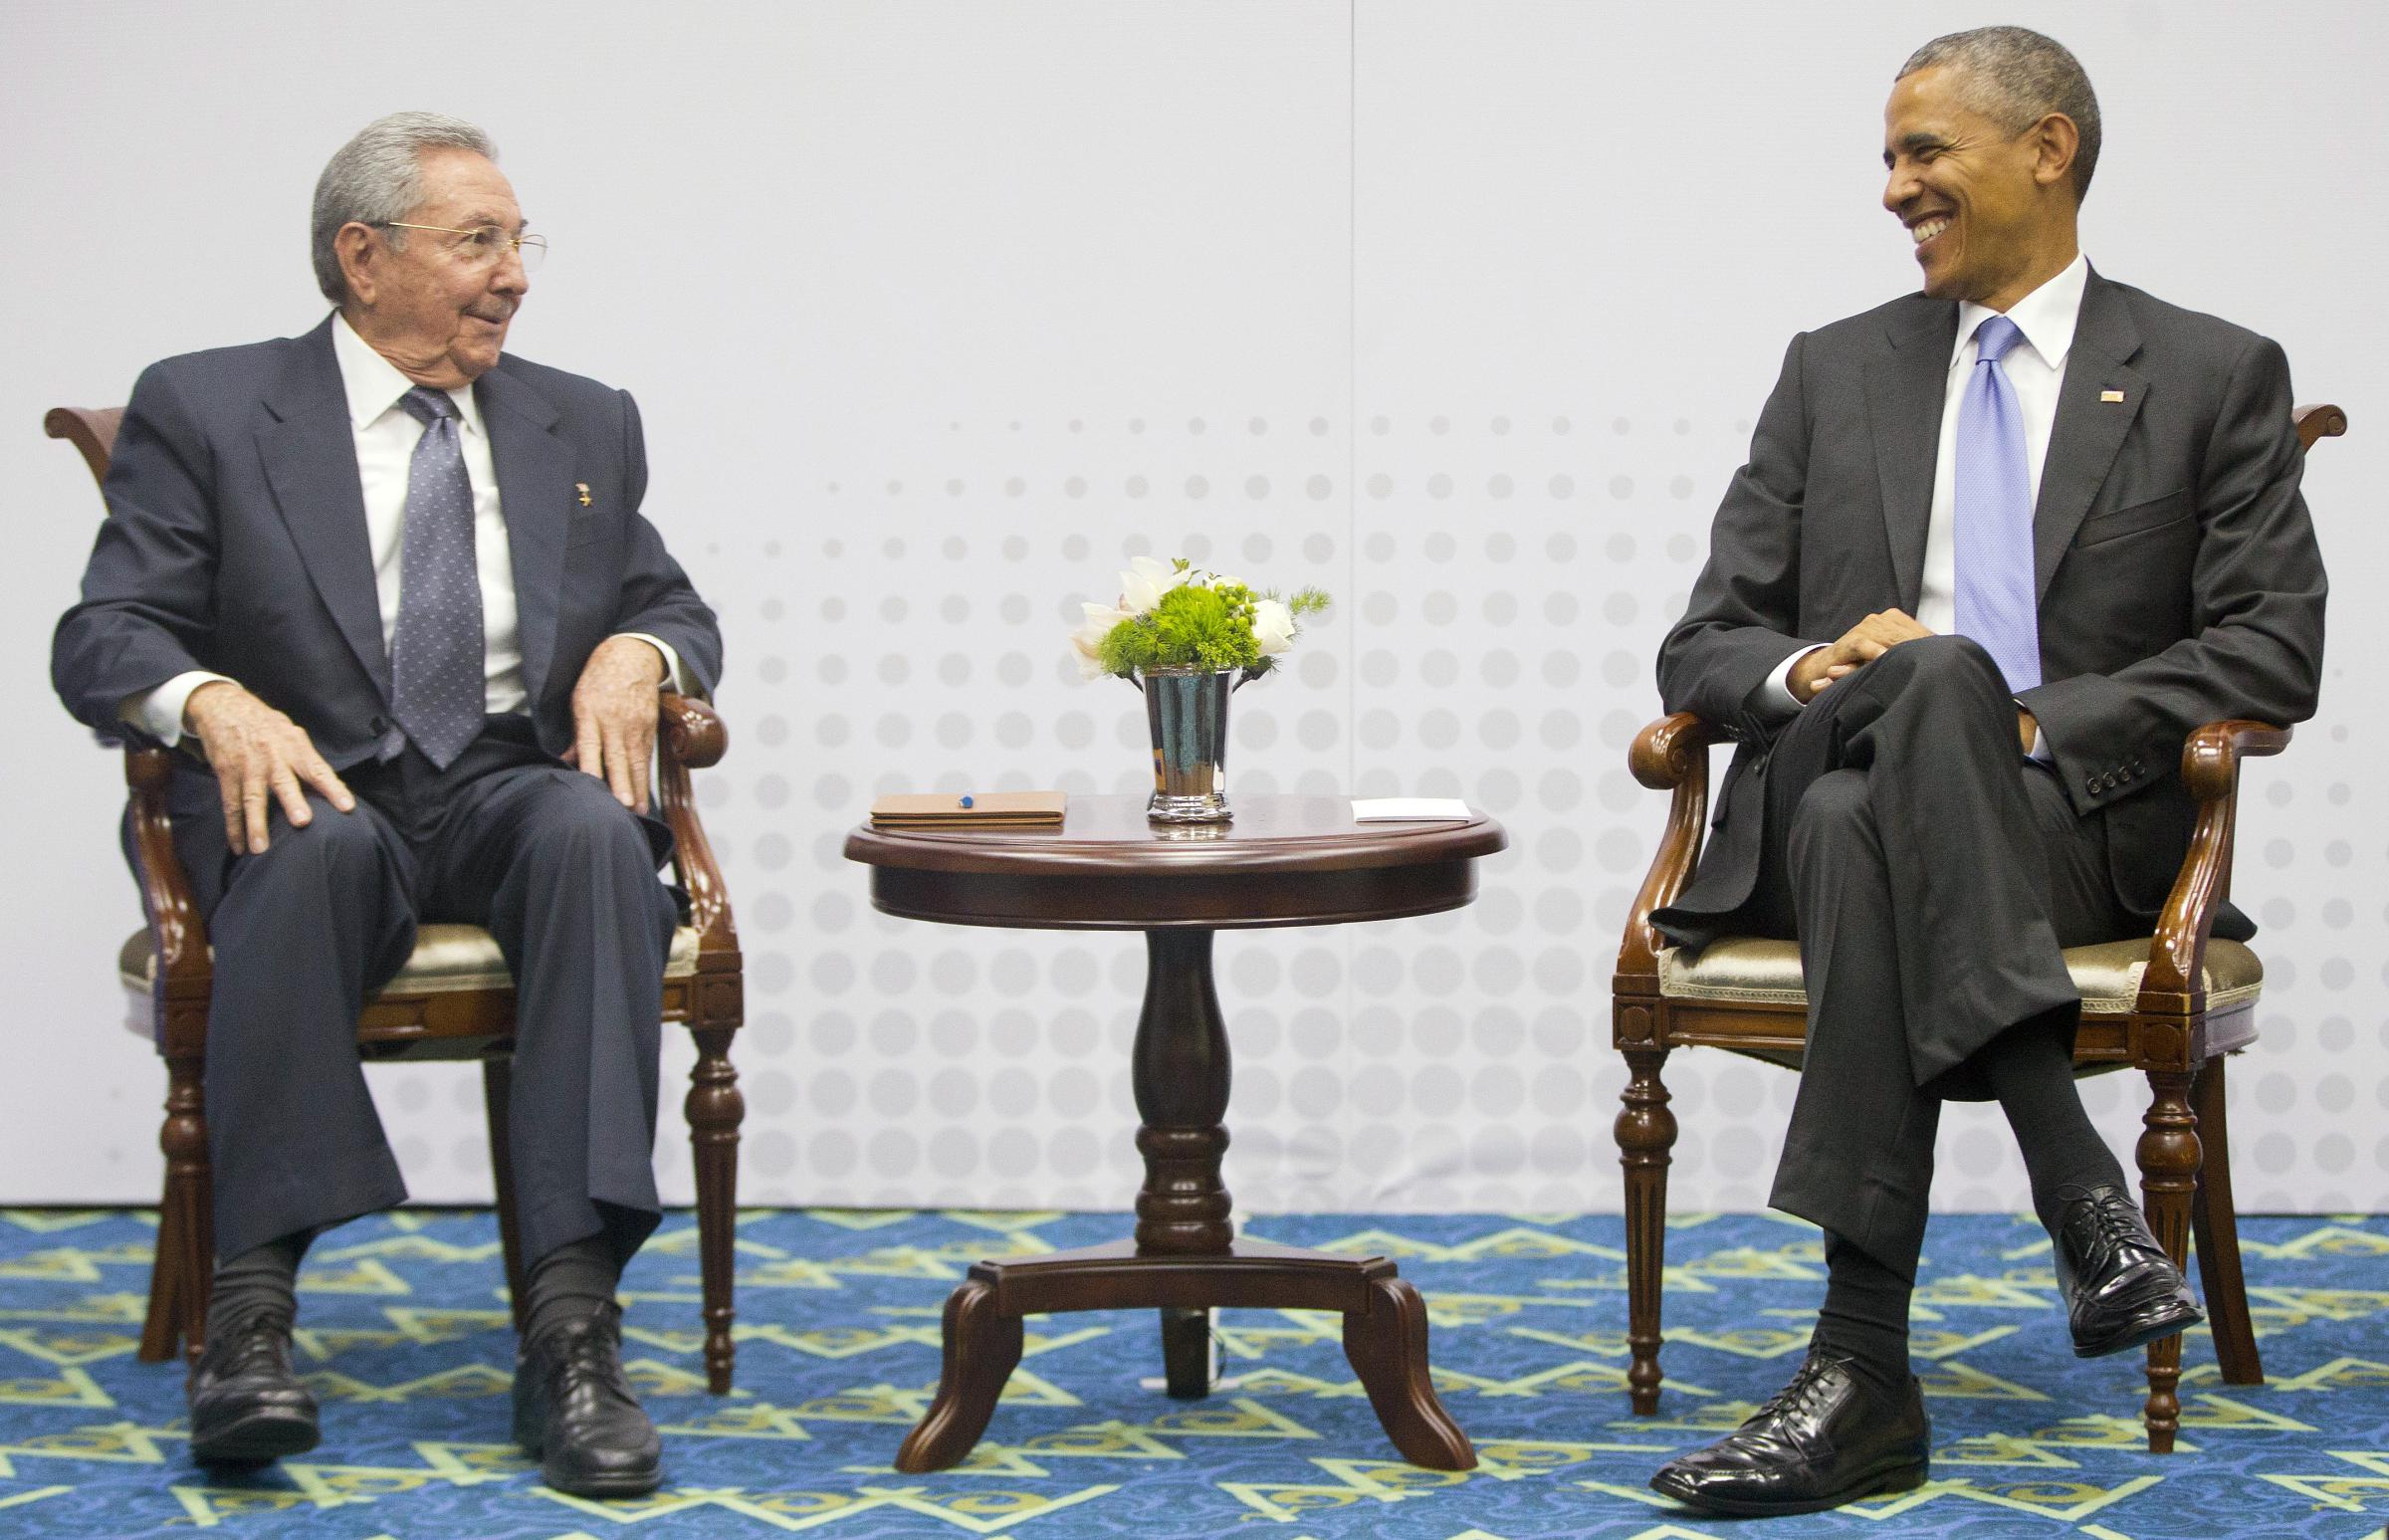 Obama Castro Meet In Spirit Of Openness Wjct News